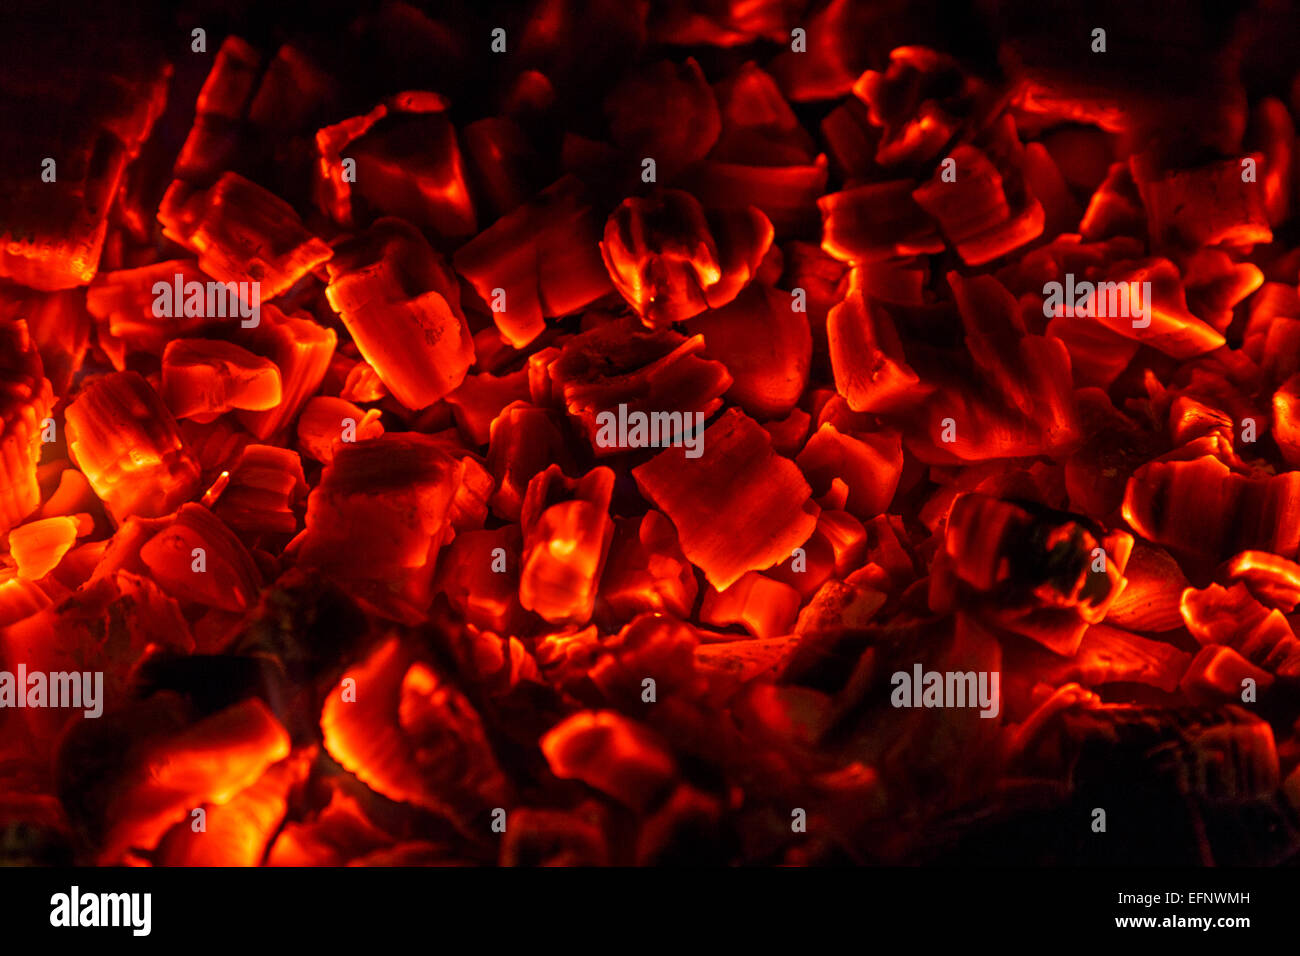 Embers Photos Download The BEST Free Embers Stock Photos  HD Images